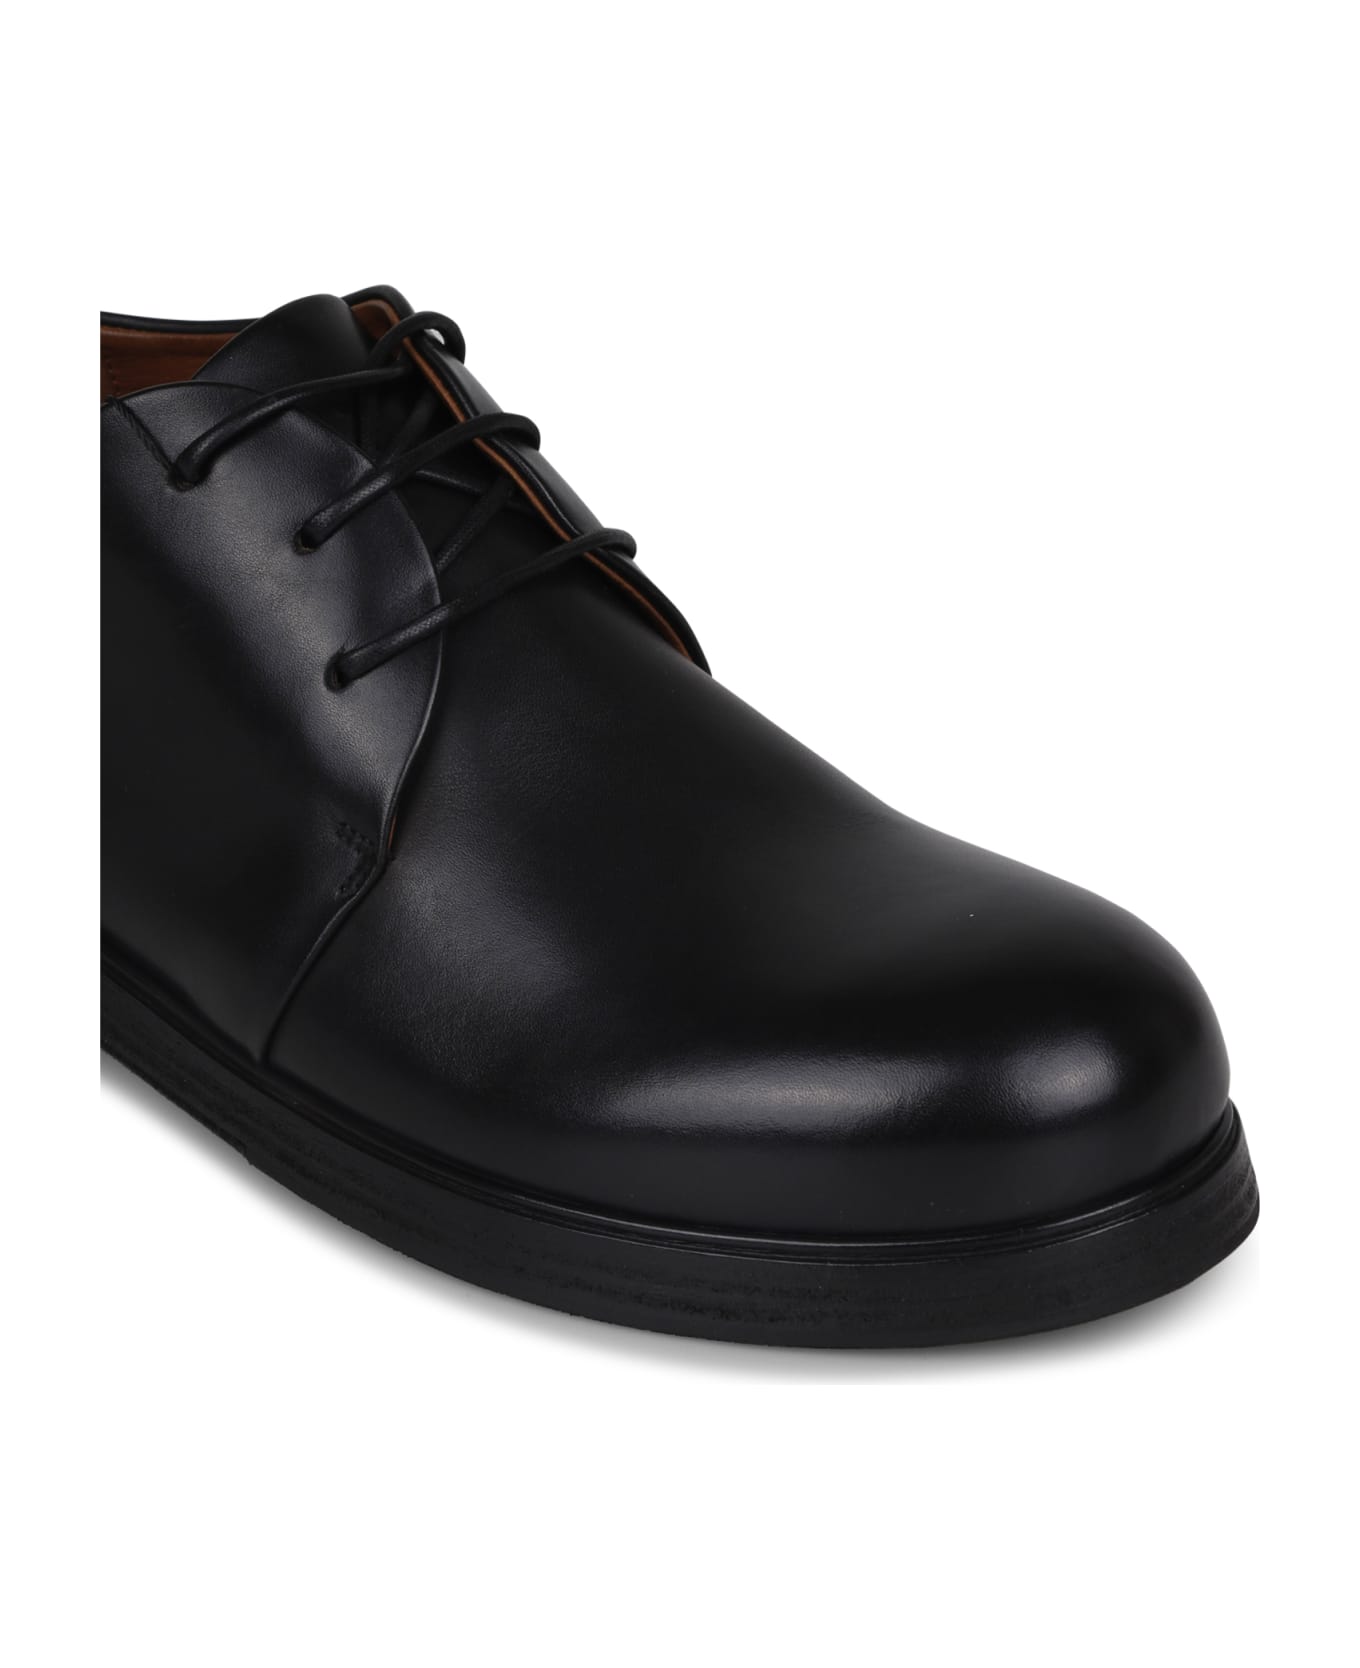 Marsell Zucca Leather Oxford Shoes